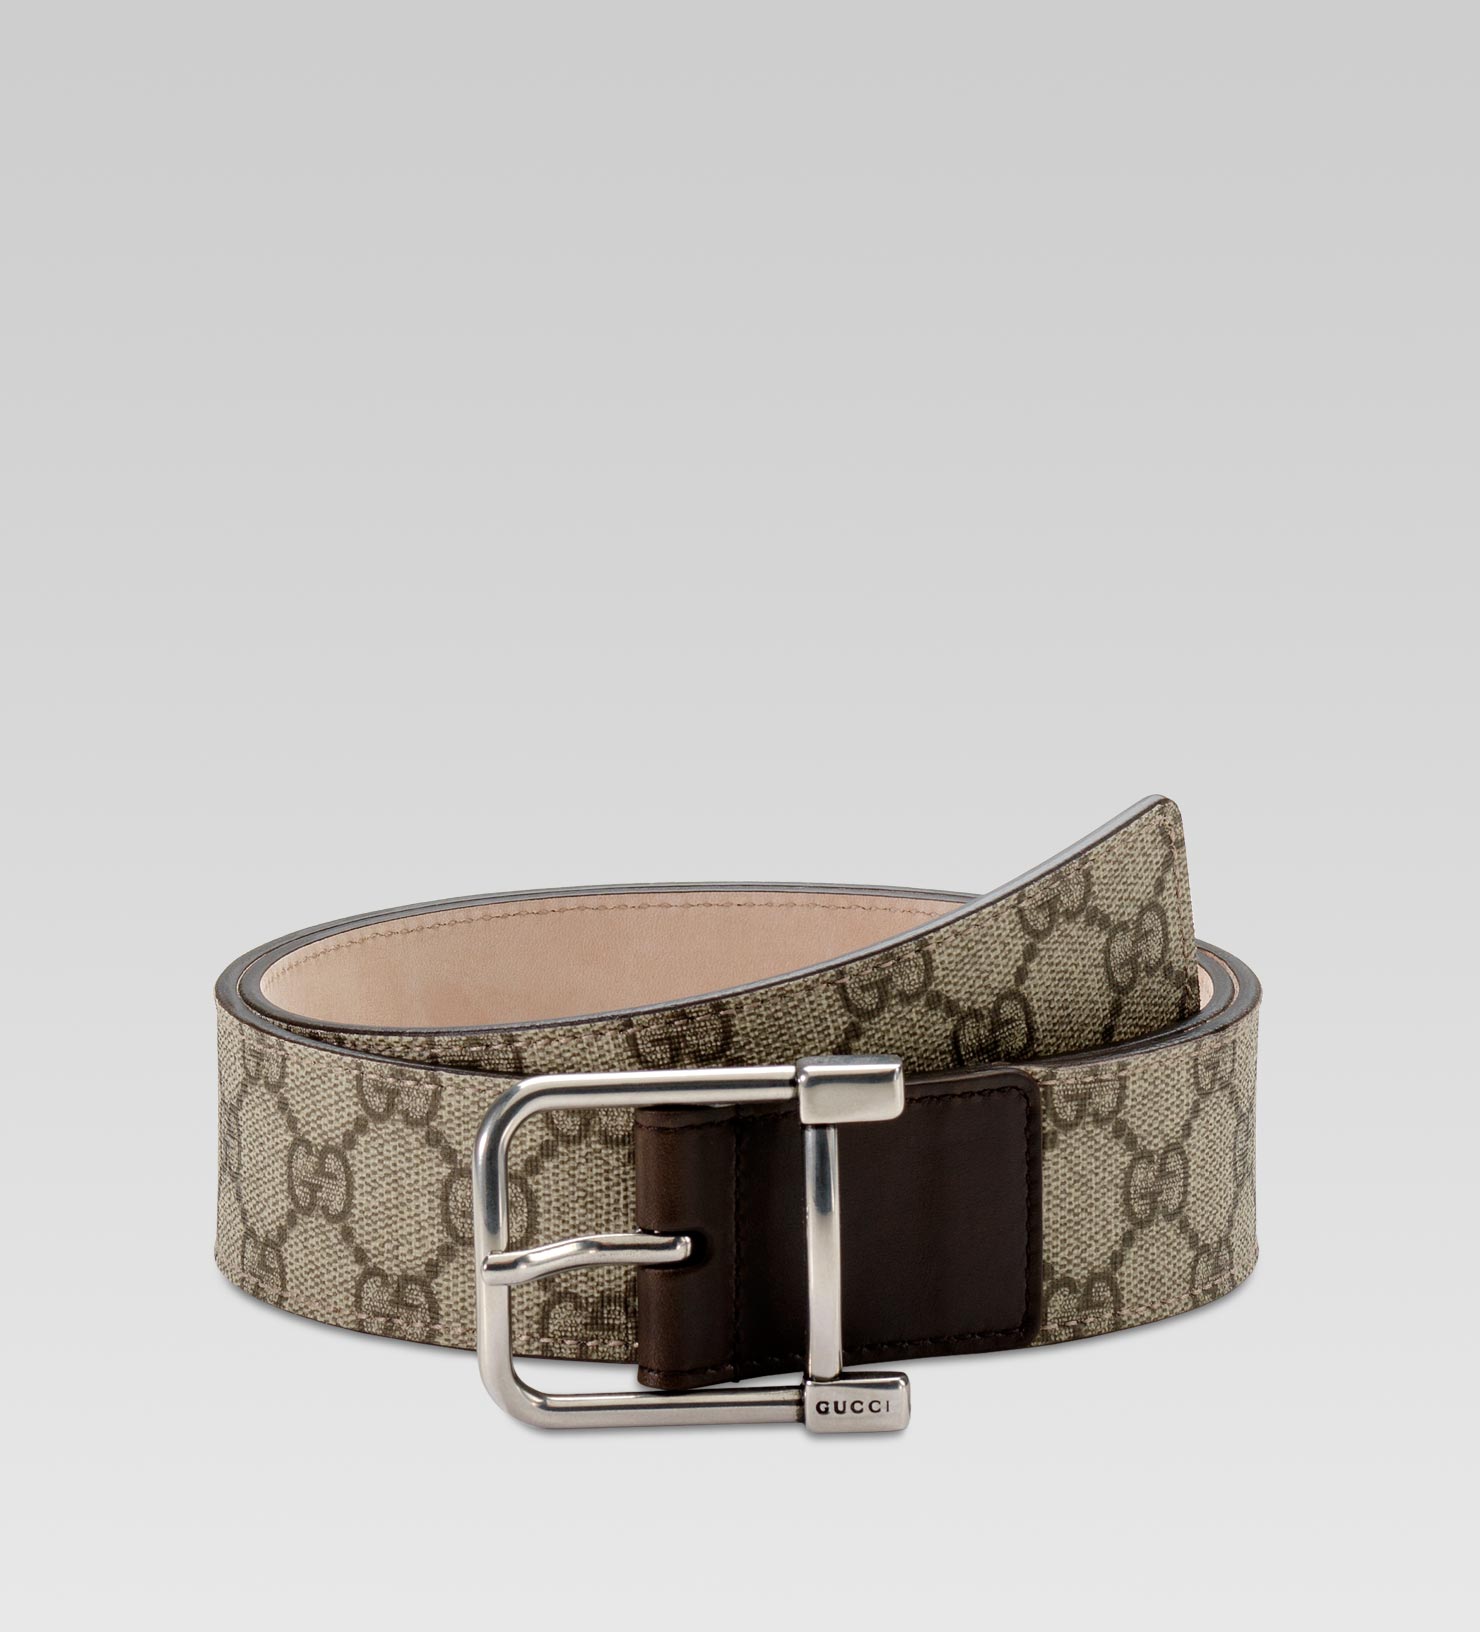 Gucci Belt with Square Spur Buckle in Beige for Men | Lyst